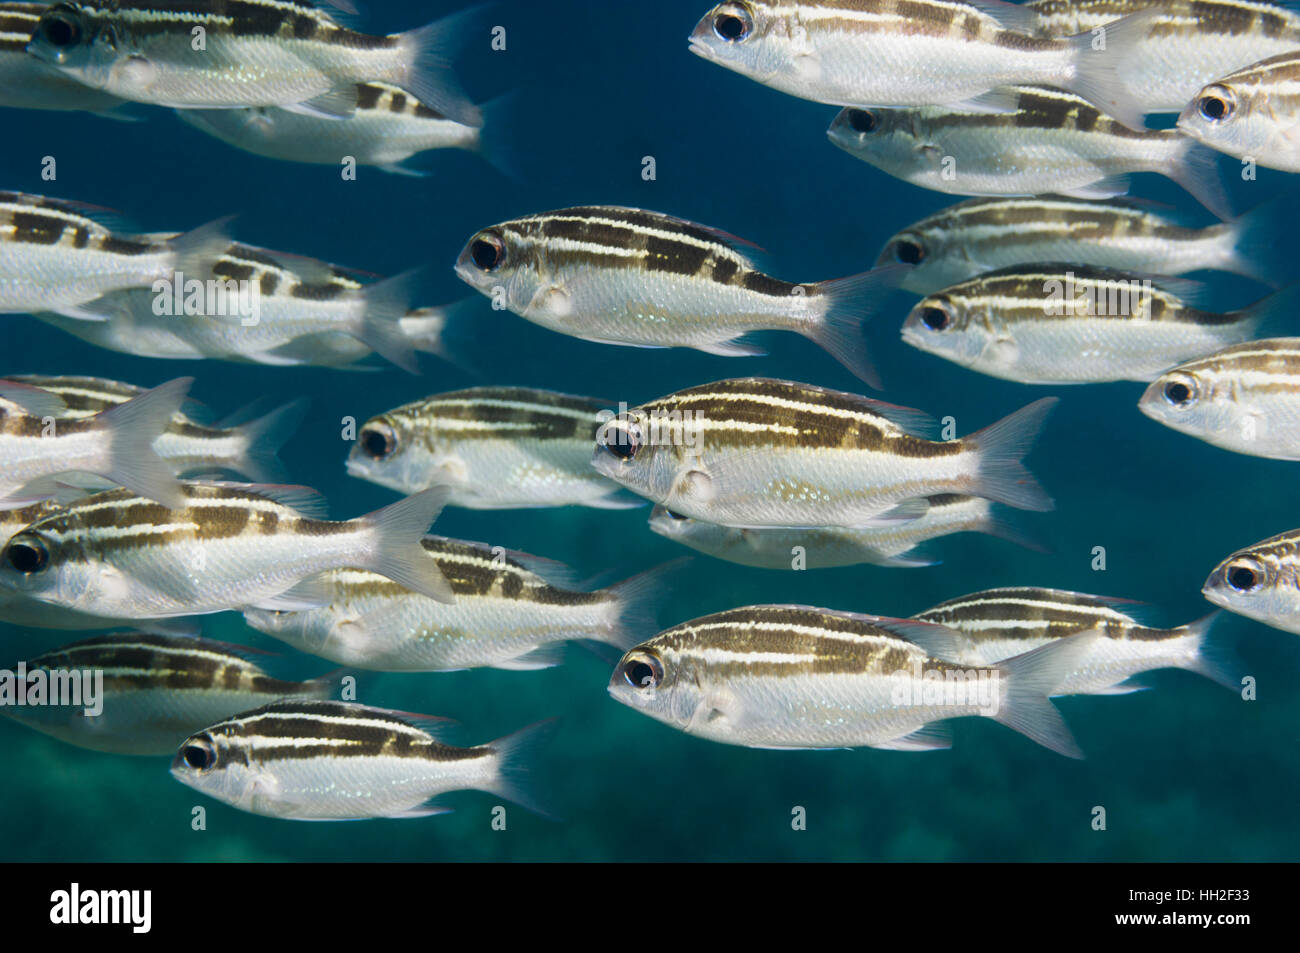 Striped monocle bream or Spinecheek [Scolopsis lineata].  Indonesia. Stock Photo